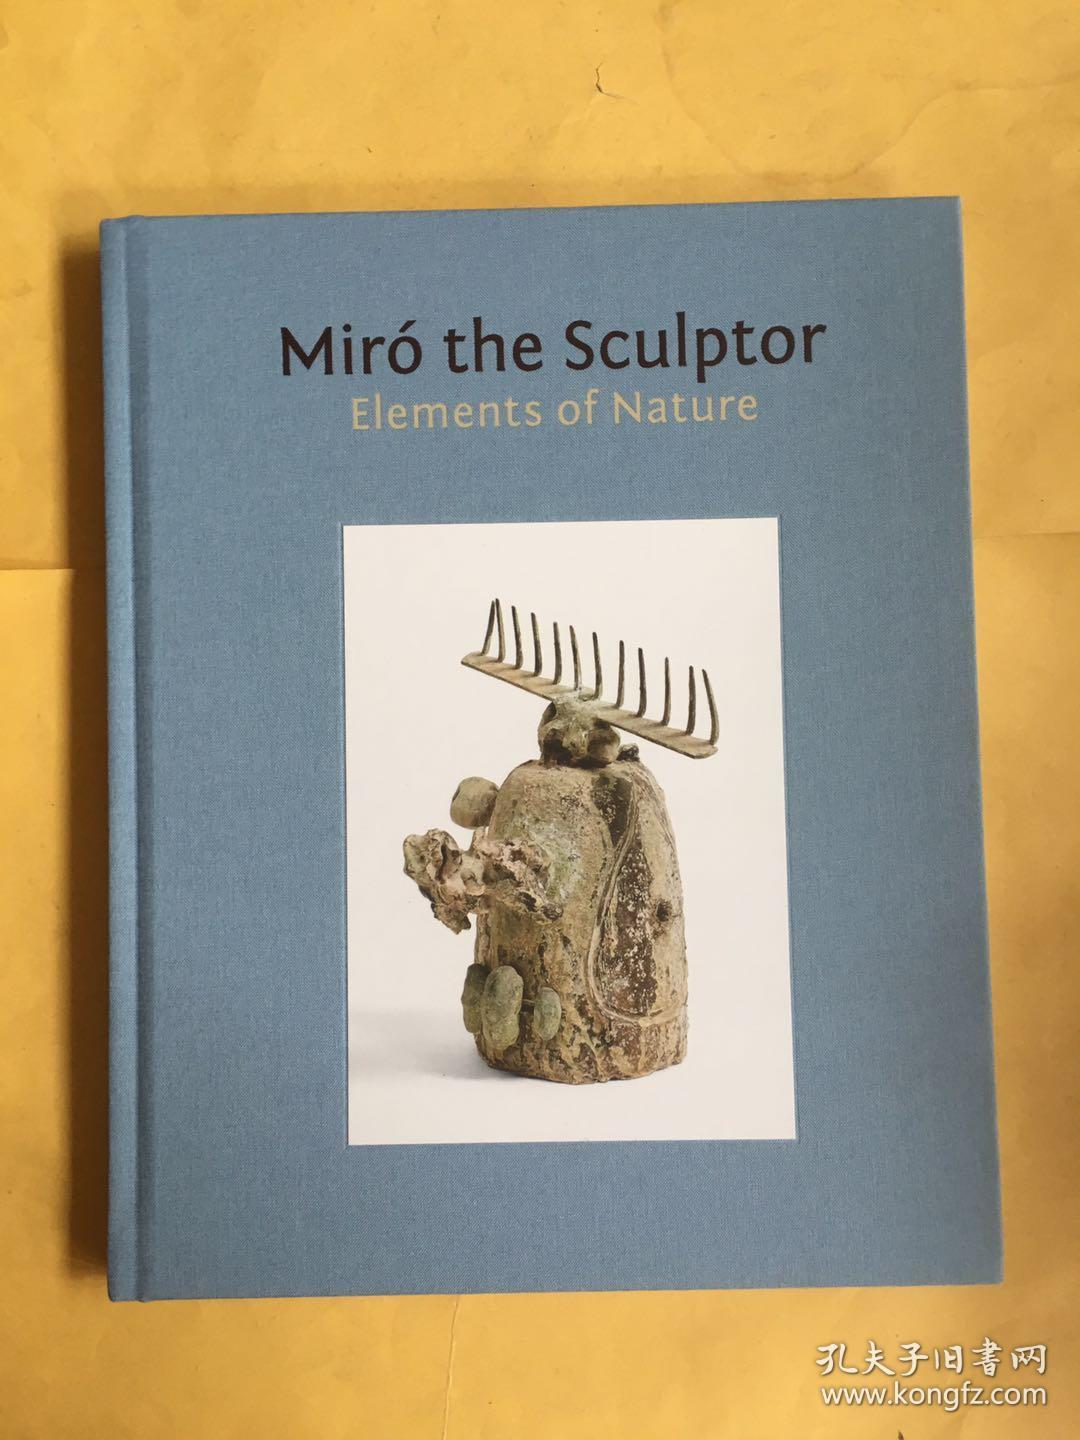 Miro the Sculptor Elements of Nature